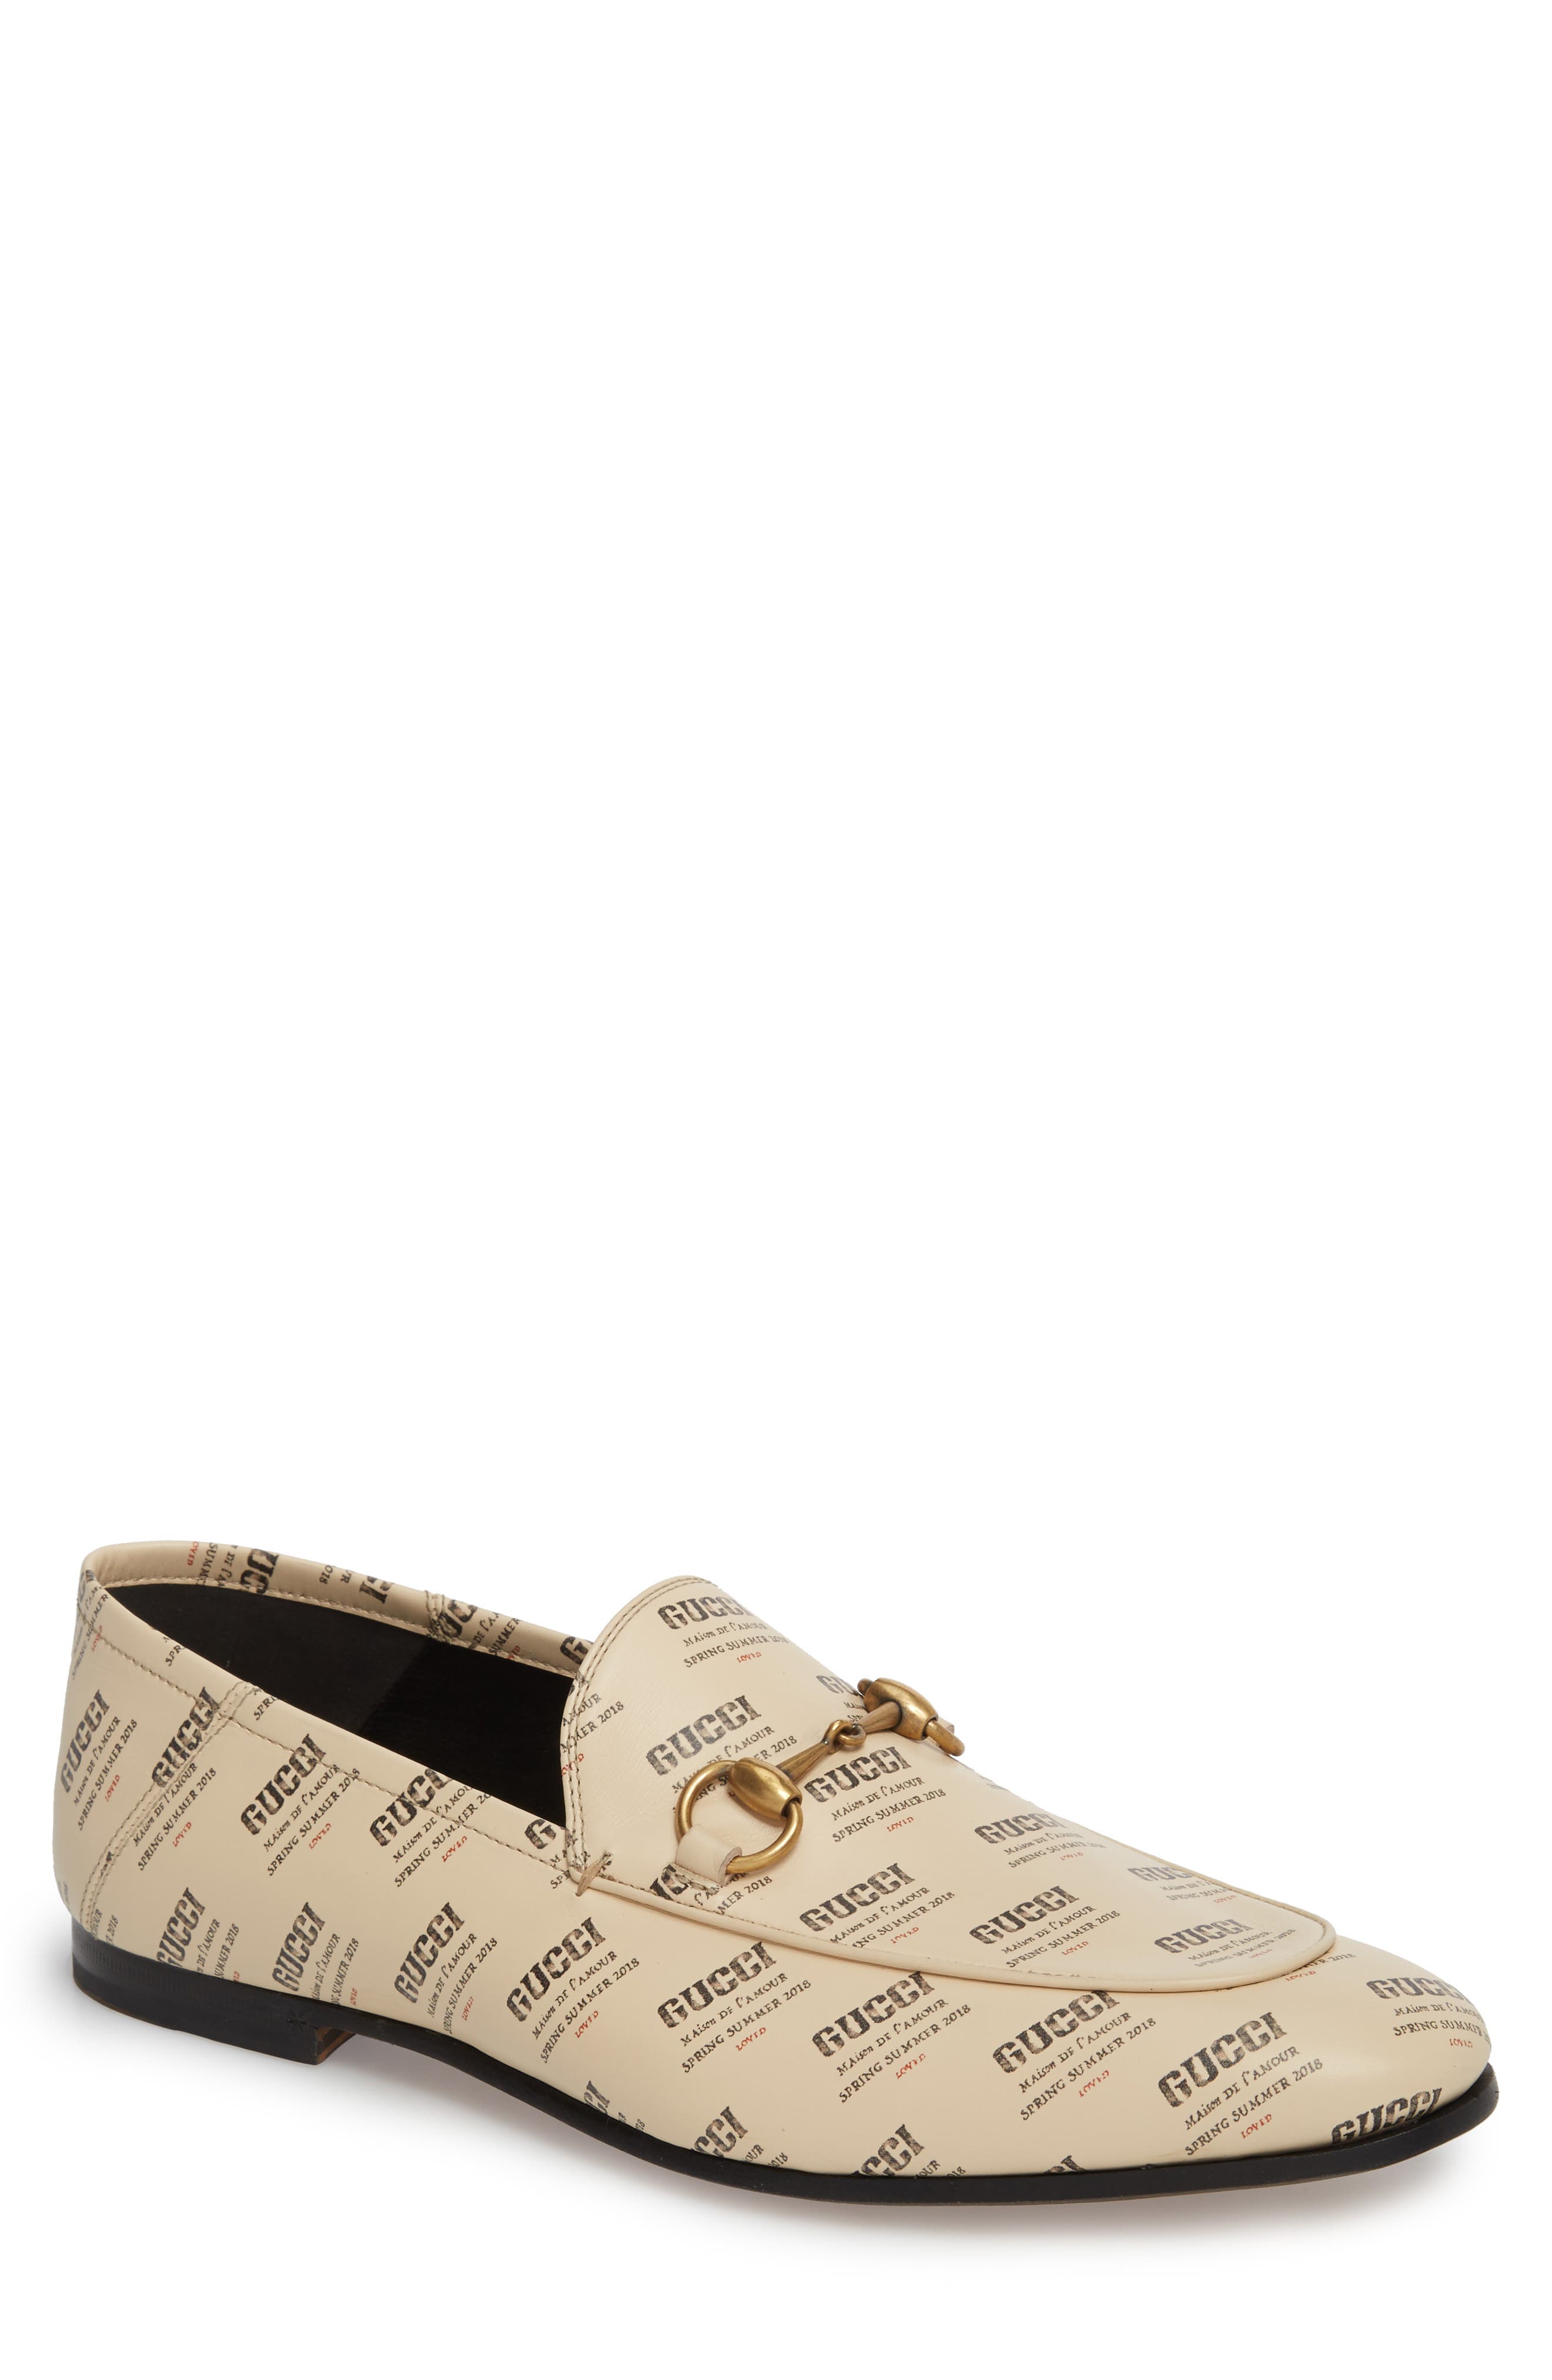 gucci loafers nordstrom rack